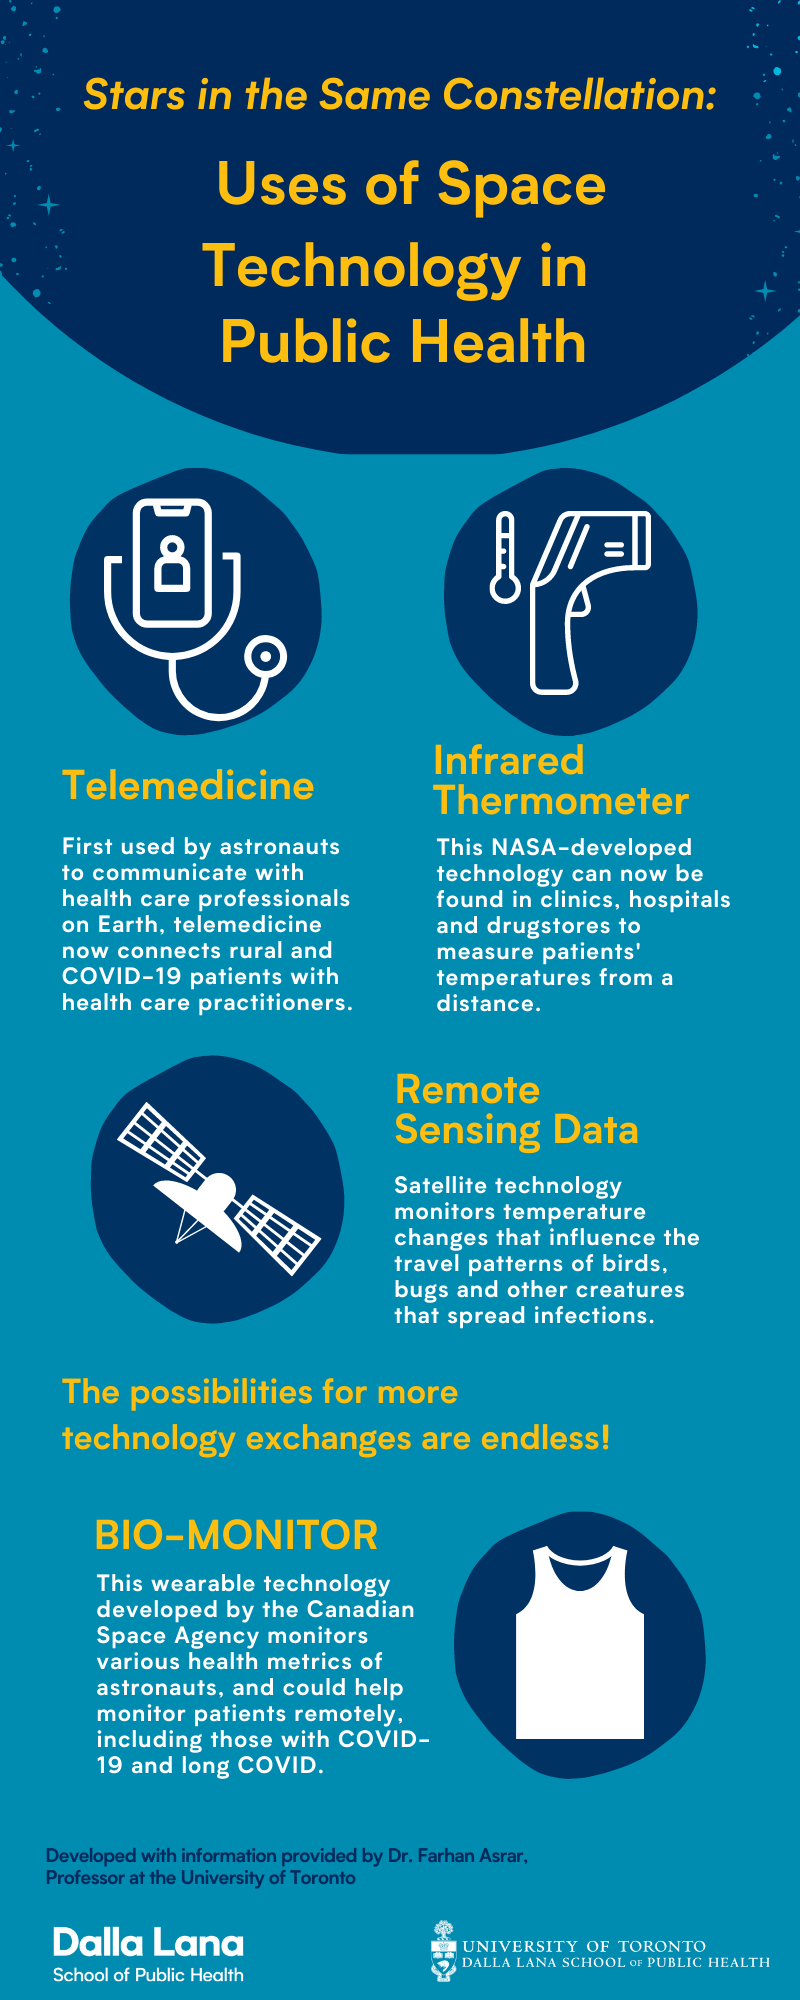 Infographic text: Uses of space technology in public health. Telemedicine: First used by astronauts to communicate with health care professionals on earth, telemedicine now connect rural and COVID-19 patients with health care practitioners. Infrared thermometer: This NASA-developed technology can now be found in clinics, hospitals and drugstores to measure patients; temperatures from a distance. Remote sensing data: satellite technology monitors temperature chagnes that influence the travel patterns of birds, bugs and other creatures that spread infections. Bio-monitor: This wearable technology developed by the Canadian Space Agency monitors various health metrics of astronauts, and could help monitor patients remotely, including those with COVID-19 and long COVID. The possibilities for more technology exchanges are endless!